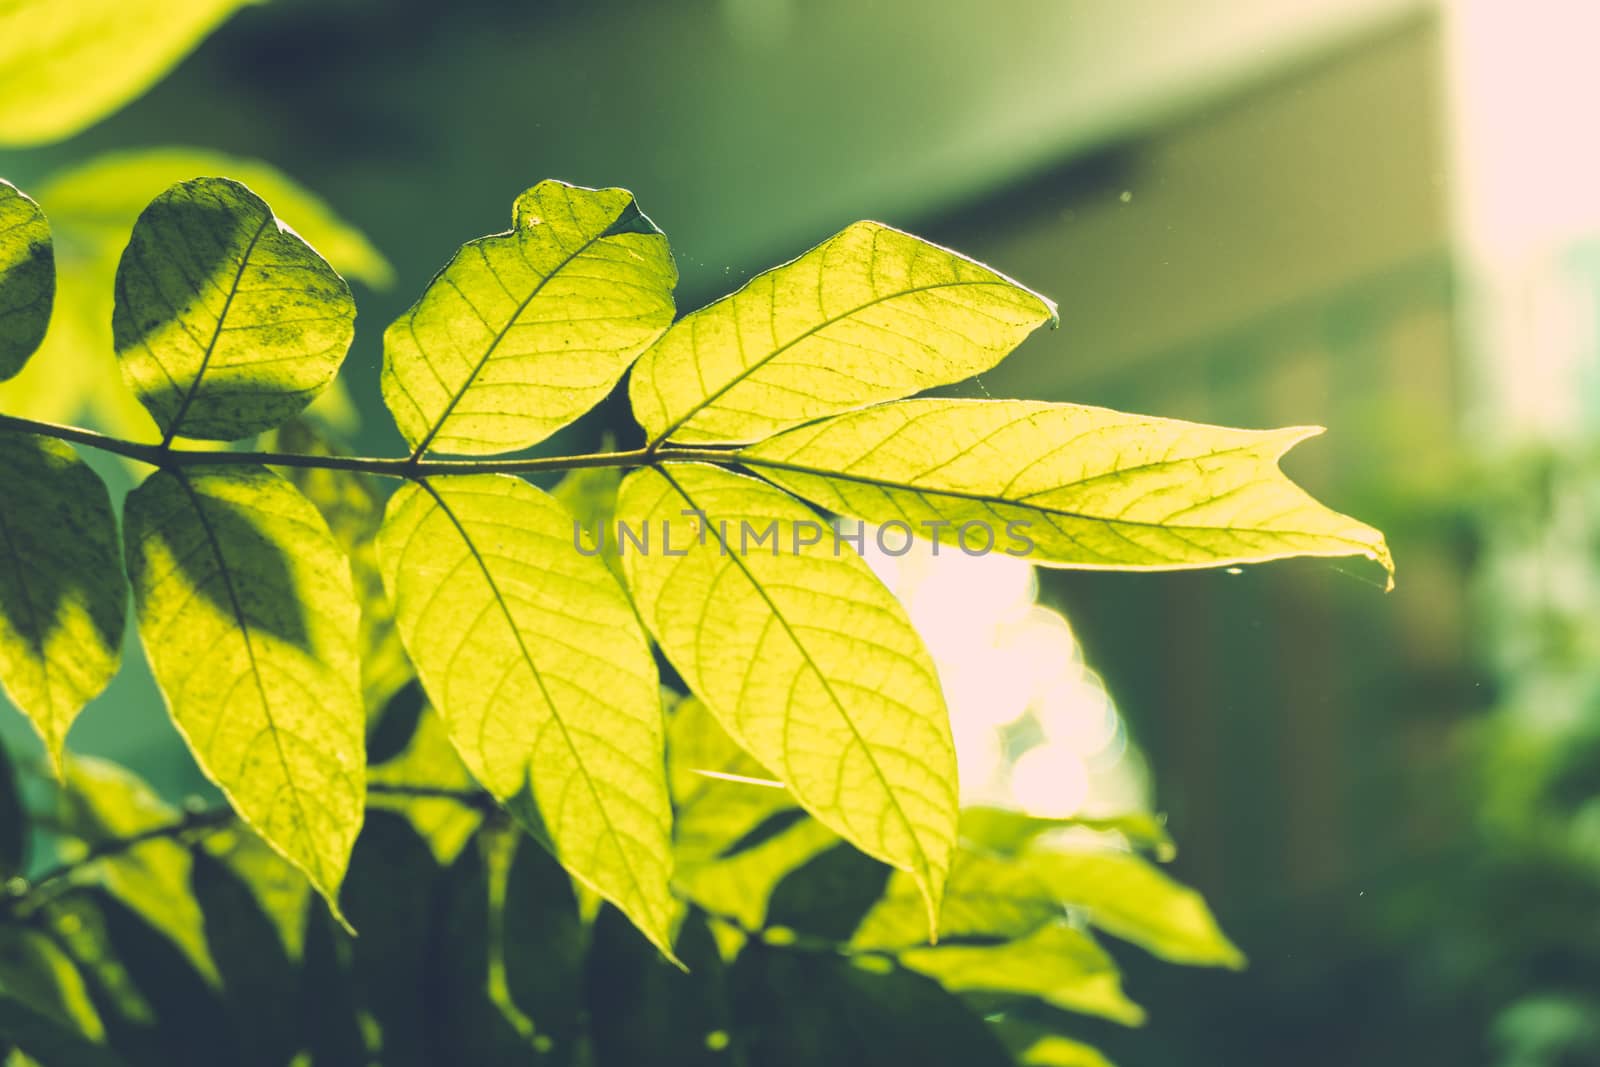 Tree branch over blurred green leaves background, nature background